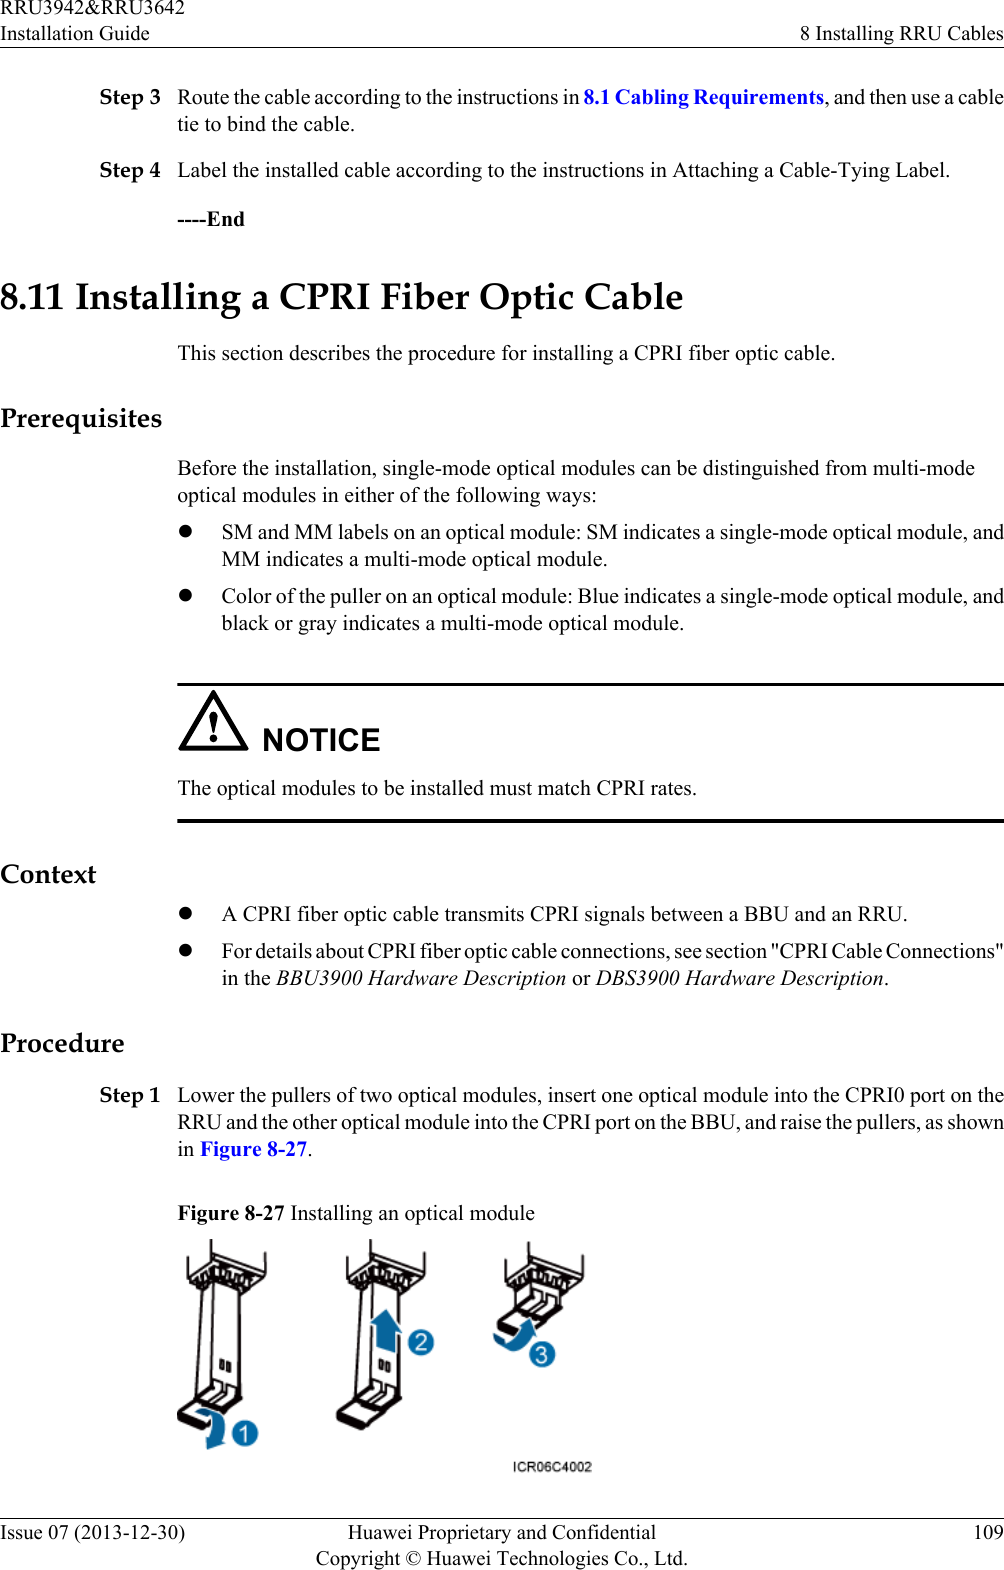 Step 3 Route the cable according to the instructions in 8.1 Cabling Requirements, and then use a cabletie to bind the cable.Step 4 Label the installed cable according to the instructions in Attaching a Cable-Tying Label.----End8.11 Installing a CPRI Fiber Optic CableThis section describes the procedure for installing a CPRI fiber optic cable.PrerequisitesBefore the installation, single-mode optical modules can be distinguished from multi-modeoptical modules in either of the following ways:lSM and MM labels on an optical module: SM indicates a single-mode optical module, andMM indicates a multi-mode optical module.lColor of the puller on an optical module: Blue indicates a single-mode optical module, andblack or gray indicates a multi-mode optical module.NOTICEThe optical modules to be installed must match CPRI rates.ContextlA CPRI fiber optic cable transmits CPRI signals between a BBU and an RRU.lFor details about CPRI fiber optic cable connections, see section &quot;CPRI Cable Connections&quot;in the BBU3900 Hardware Description or DBS3900 Hardware Description.ProcedureStep 1 Lower the pullers of two optical modules, insert one optical module into the CPRI0 port on theRRU and the other optical module into the CPRI port on the BBU, and raise the pullers, as shownin Figure 8-27.Figure 8-27 Installing an optical moduleRRU3942&amp;RRU3642Installation Guide 8 Installing RRU CablesIssue 07 (2013-12-30) Huawei Proprietary and ConfidentialCopyright © Huawei Technologies Co., Ltd.109